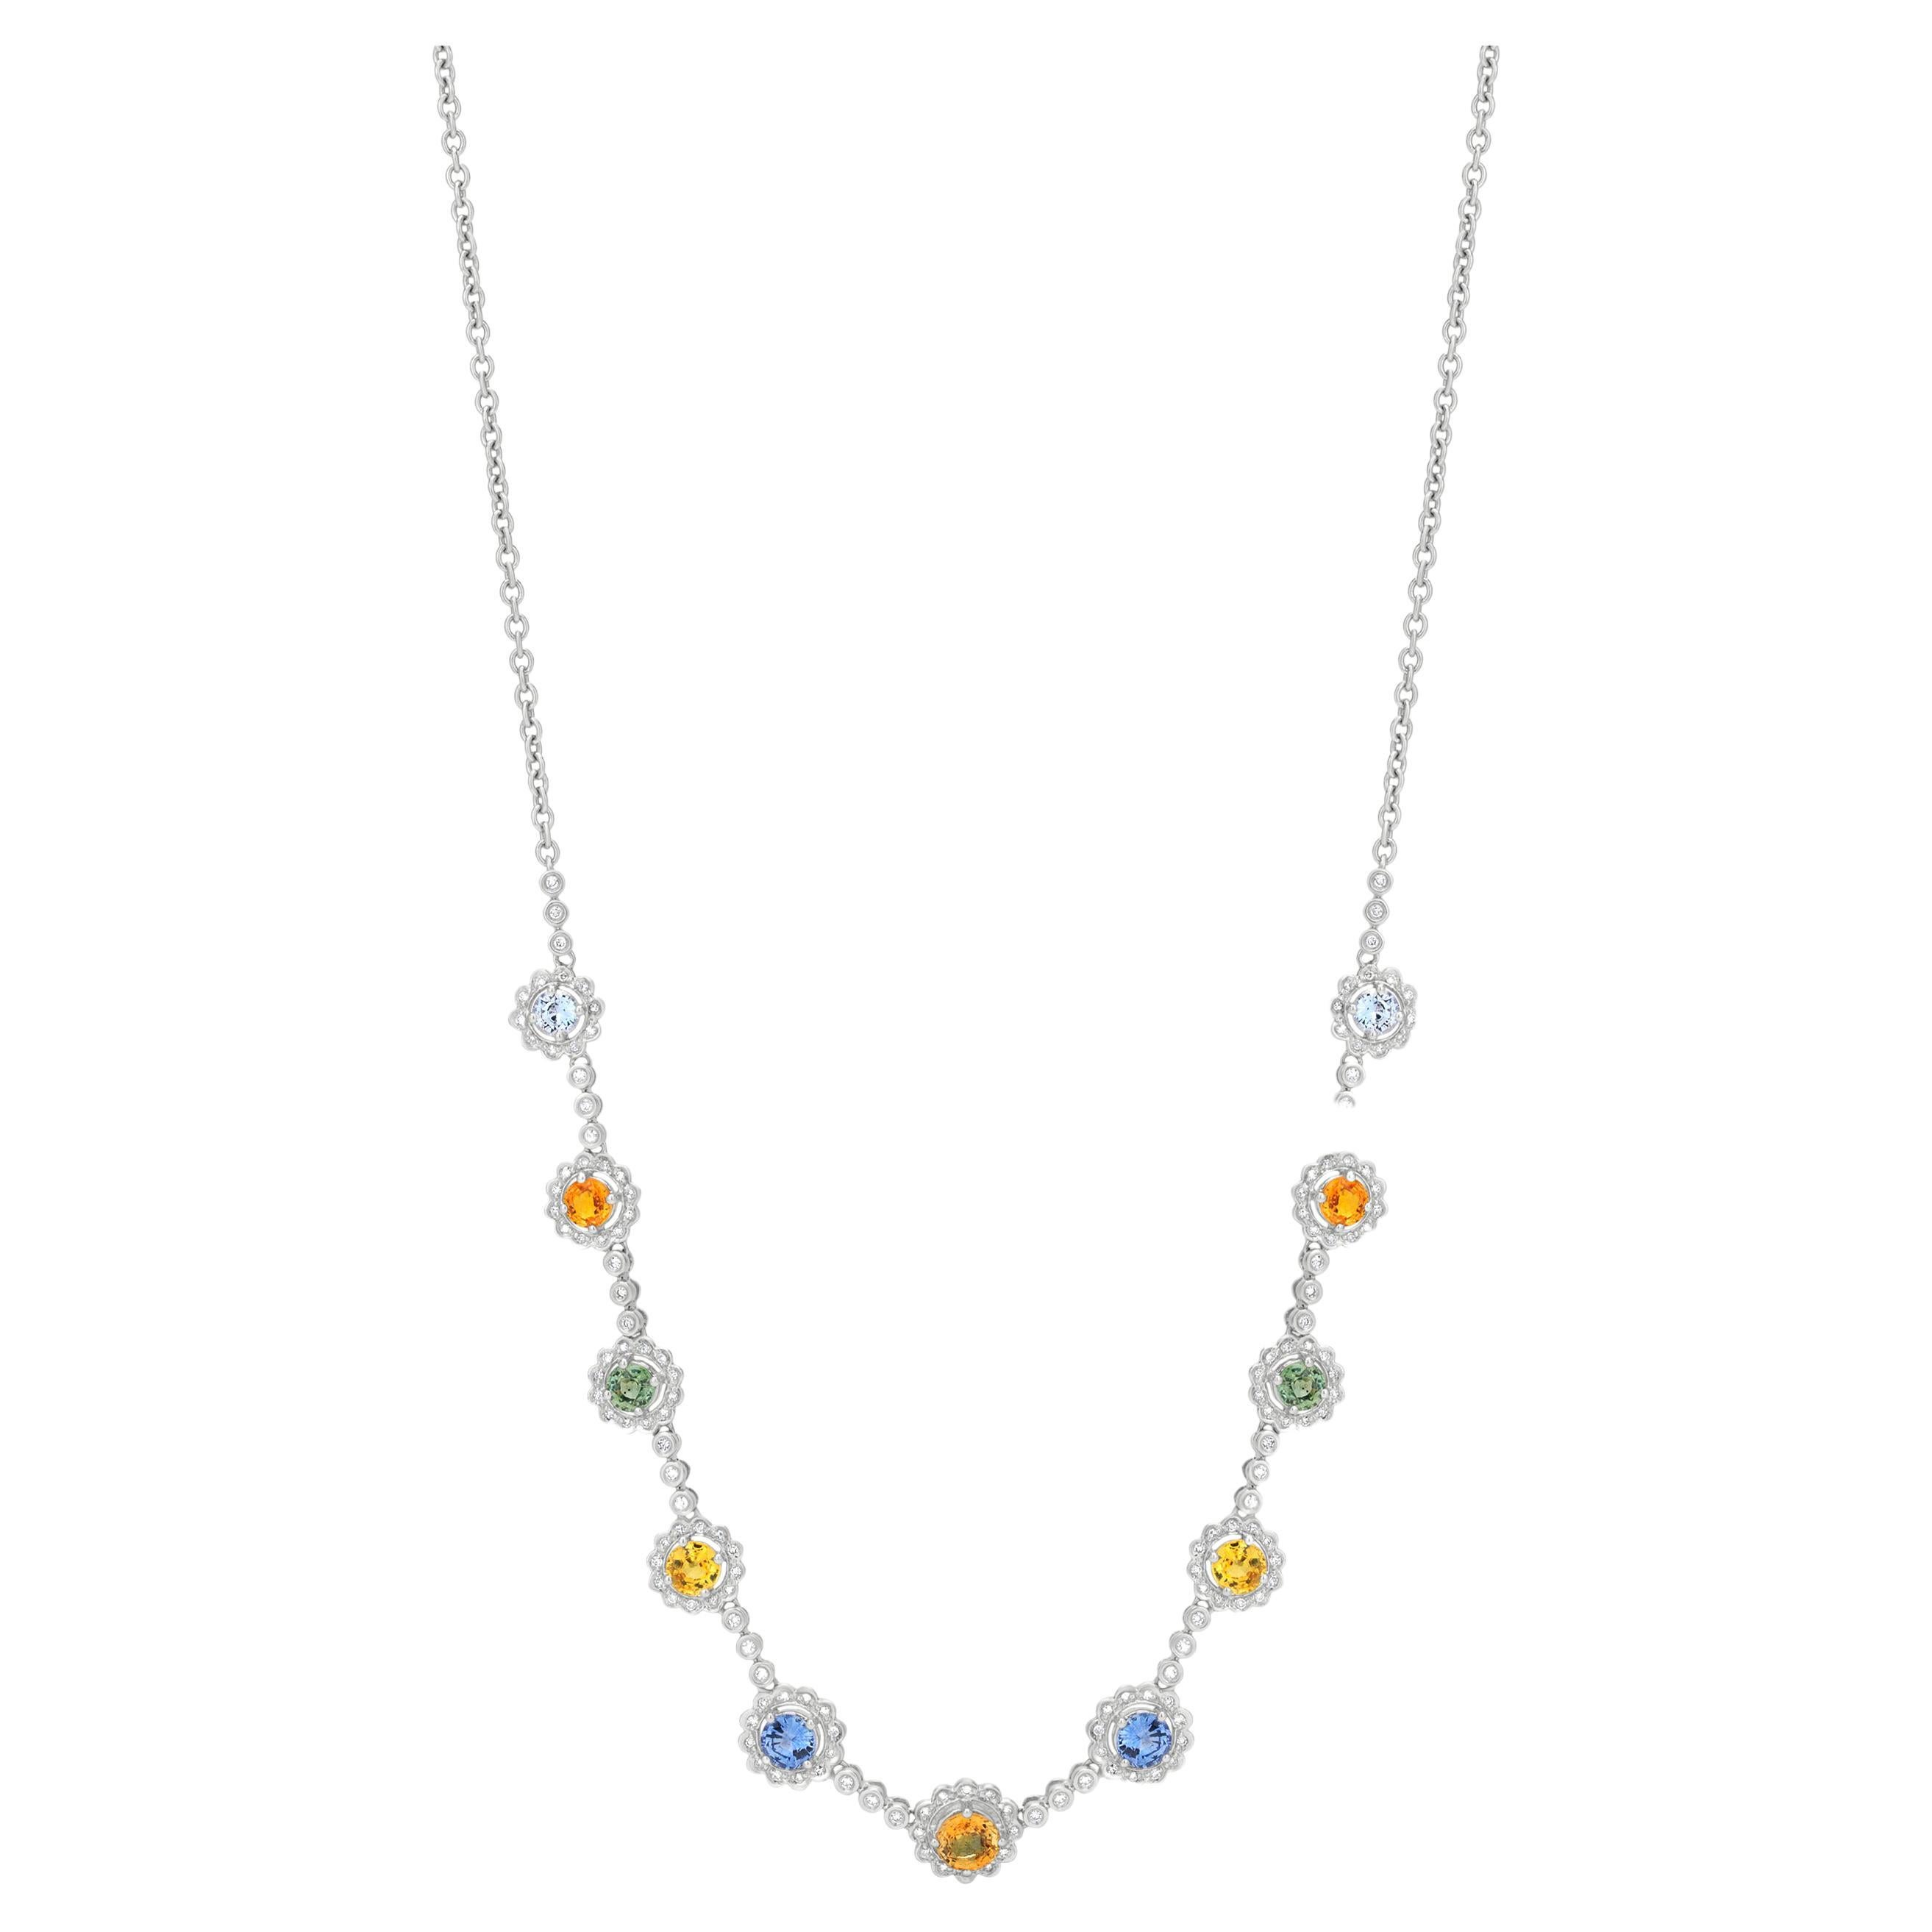 Gemistry 5.57CT Multi Sapphire Station Necklace with Diamond Accents in 18k Gold